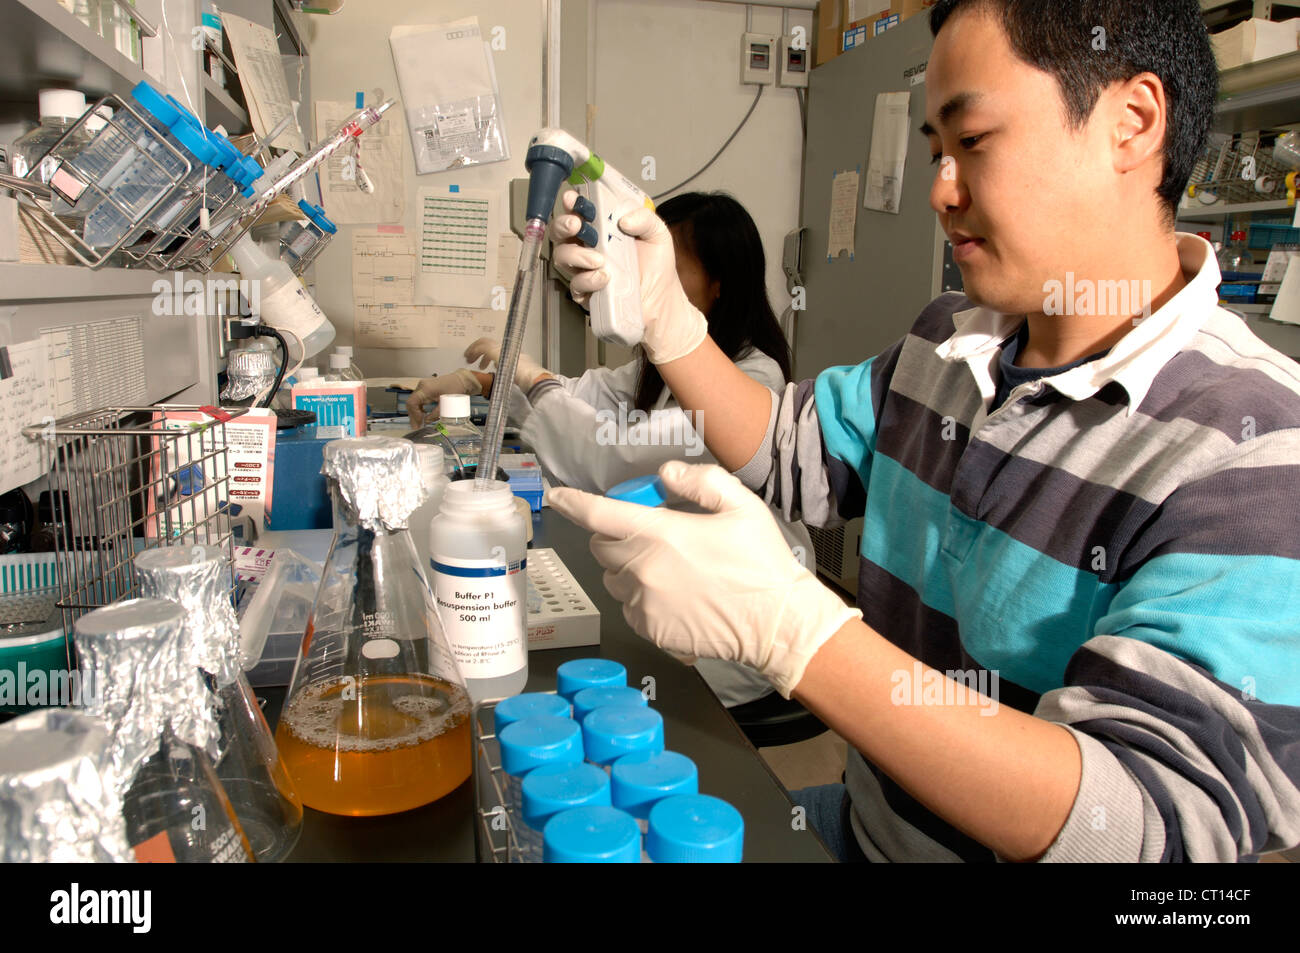 Technician working with adult stem cells Stock Photo